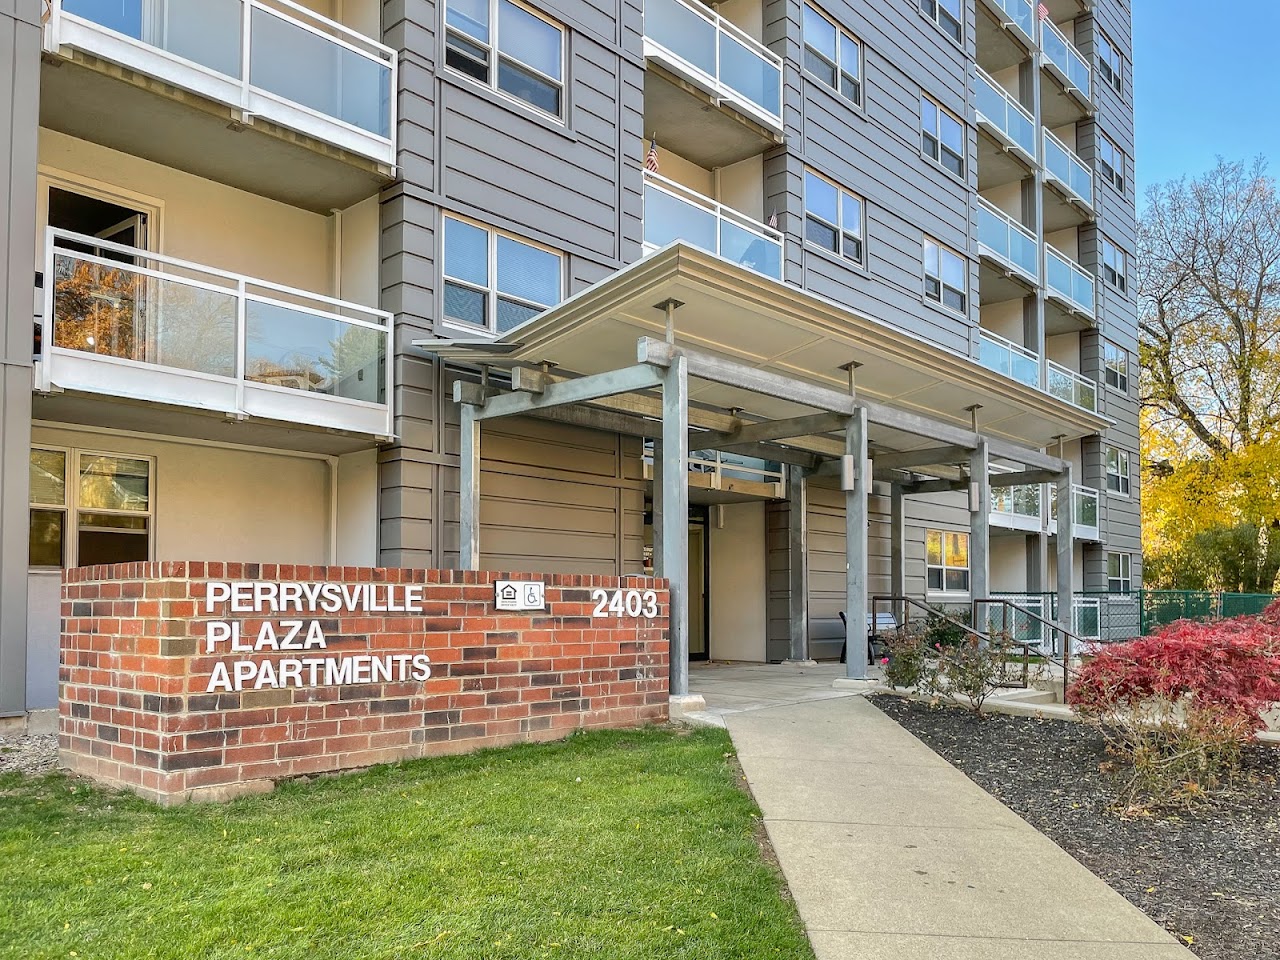 Photo of PERRYSVILLE PLAZA. Affordable housing located at 2403 PERRYSVILLE AVE PITTSBURGH, PA 15214